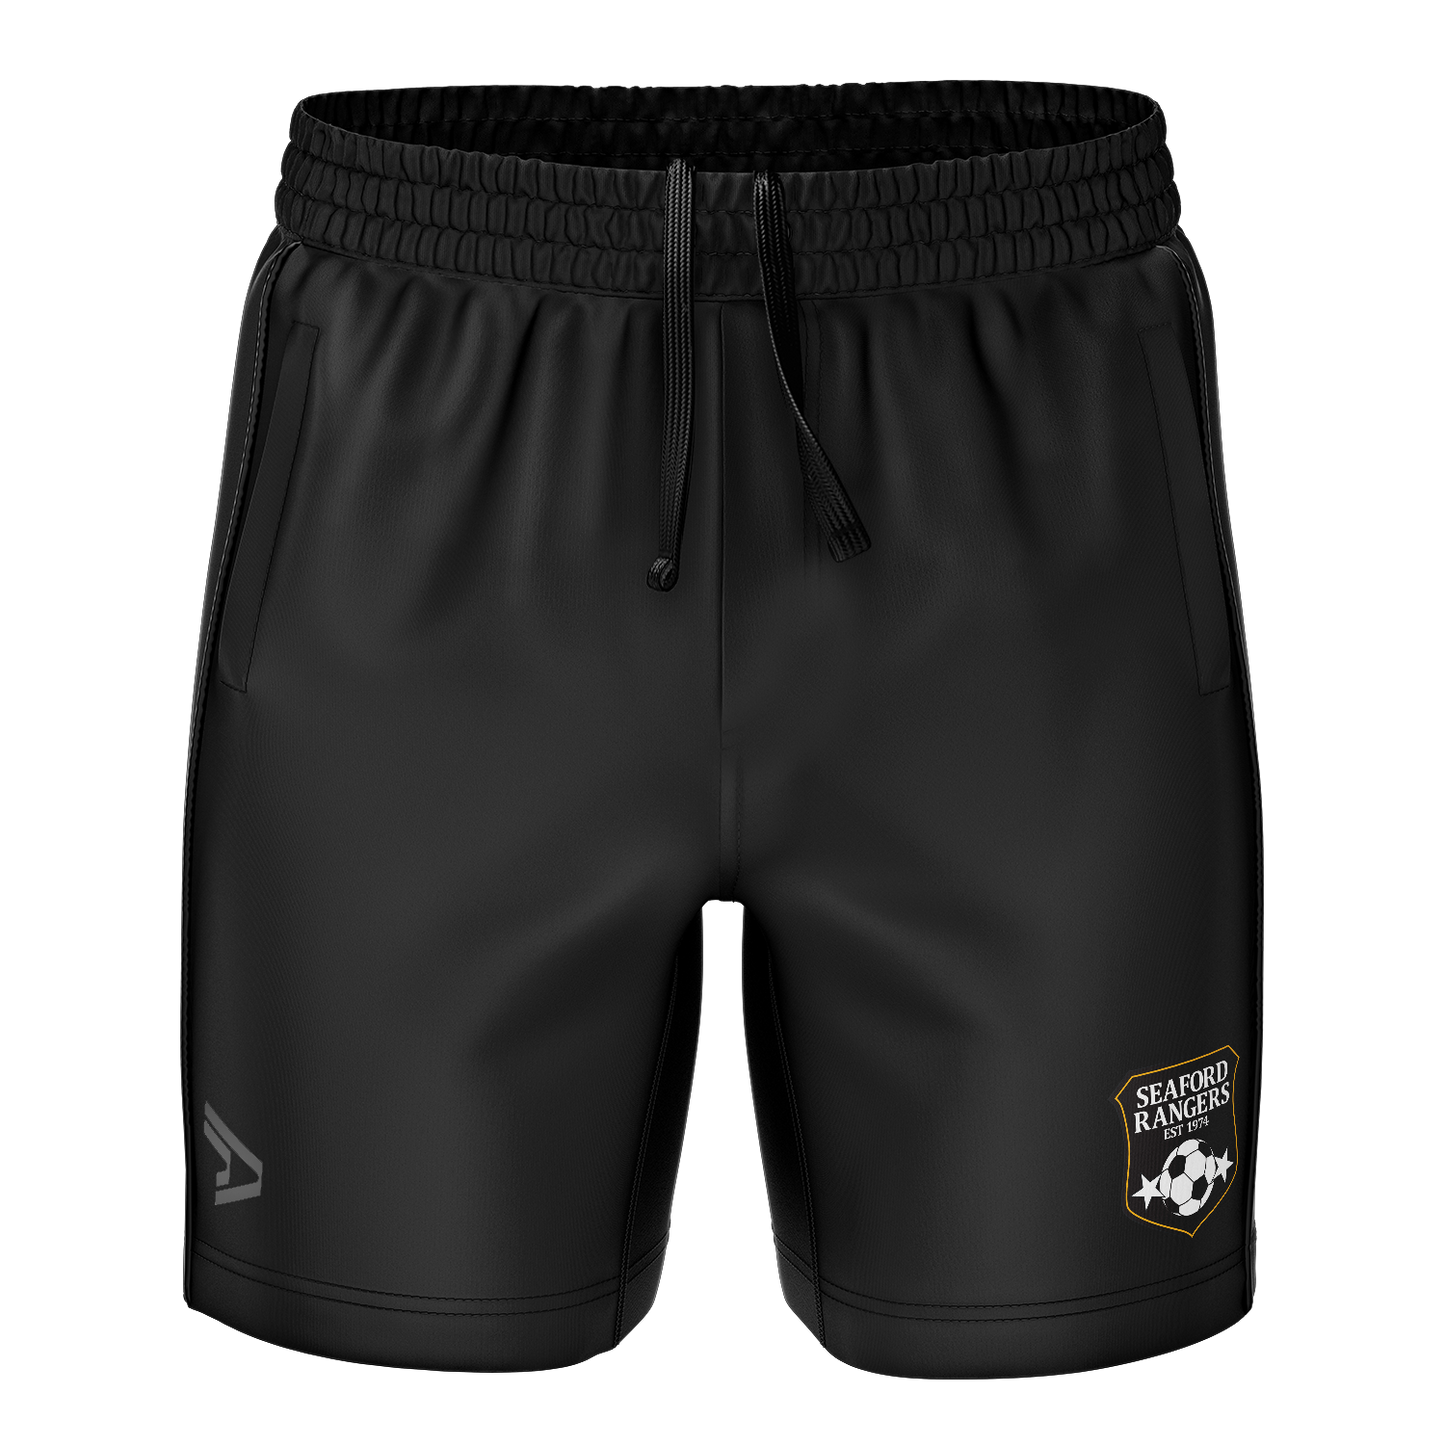 SEAFORD RANGERS SC CASUAL SHORTS WITH POCKETS